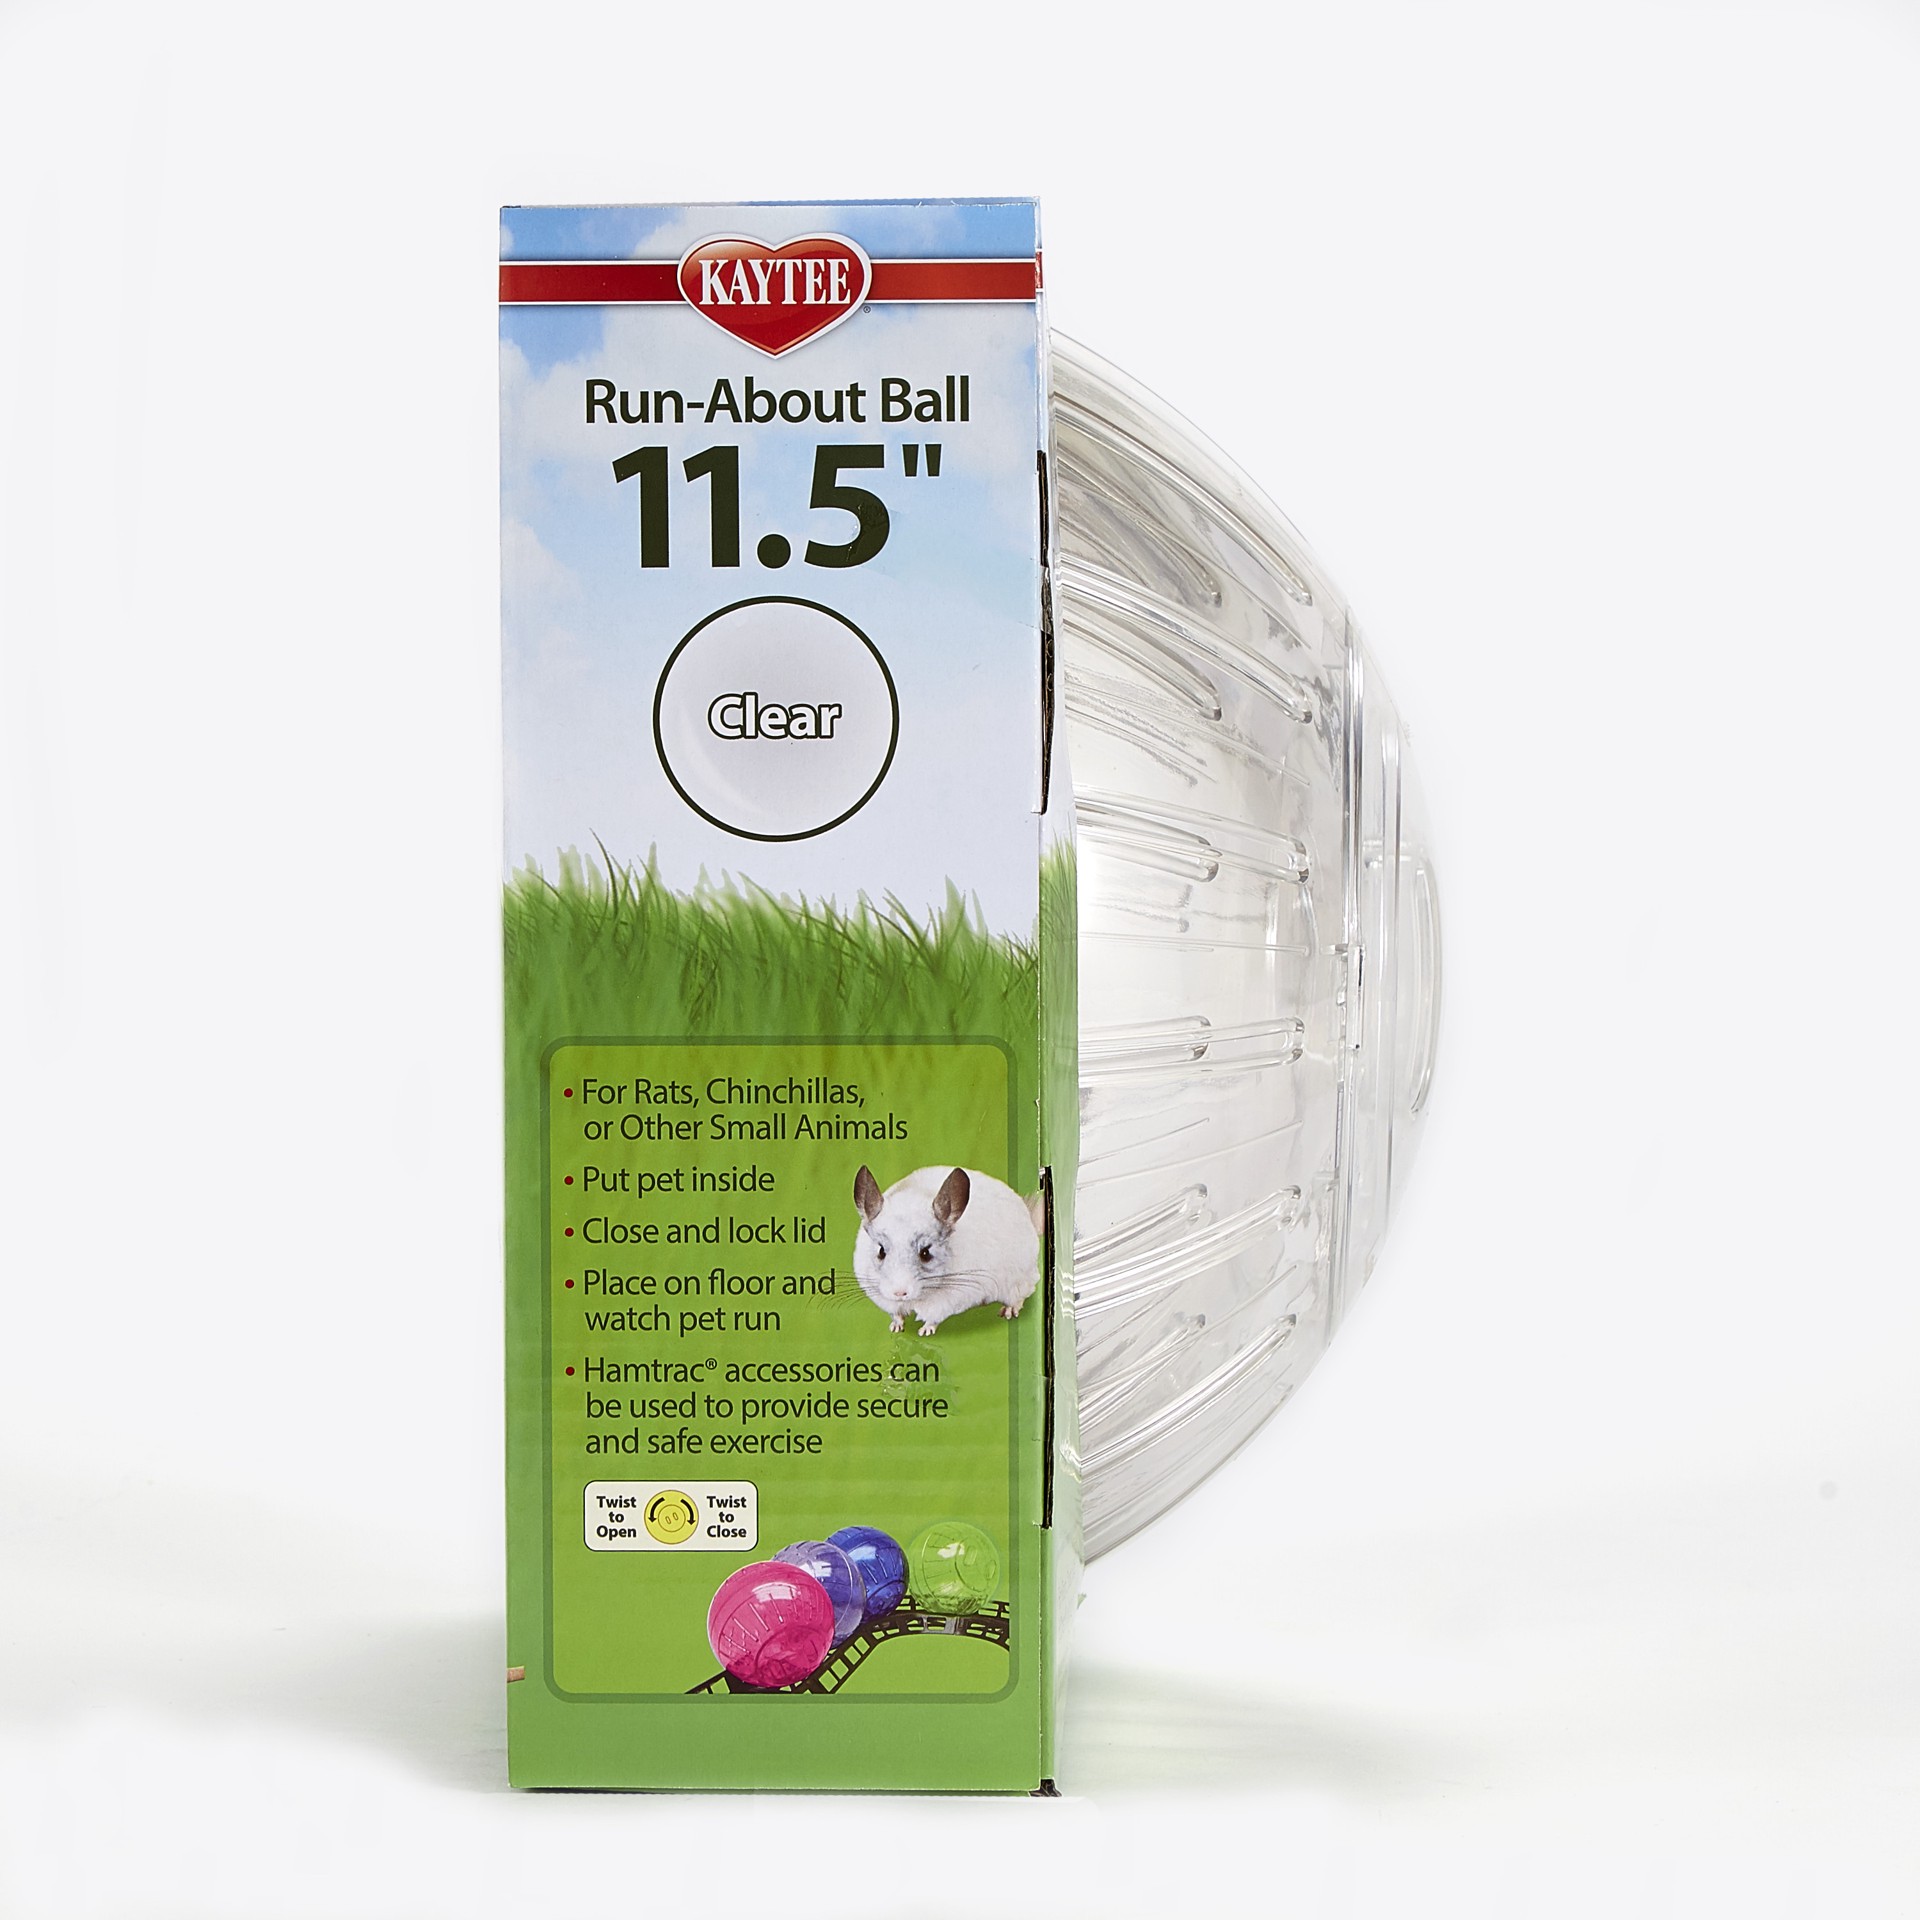 slide 5 of 10, Kaytee Hard Goods Kaytee Run-About Ball Giant Clear 11.5 Inches, 1 ct